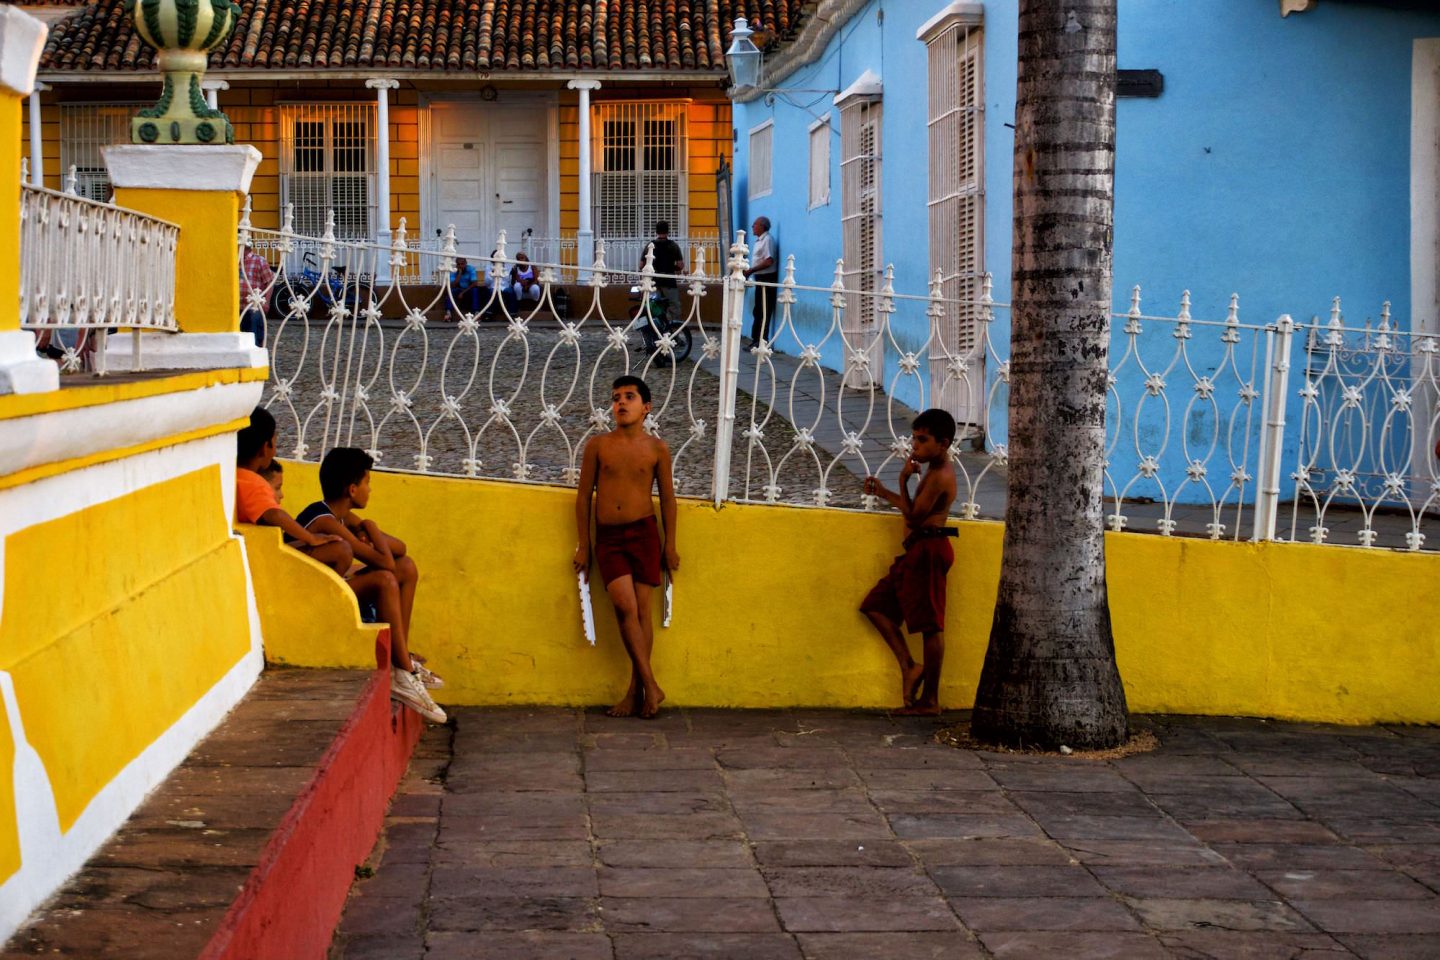 Children playing in the street in Trinidad. Daily life in Cuba.